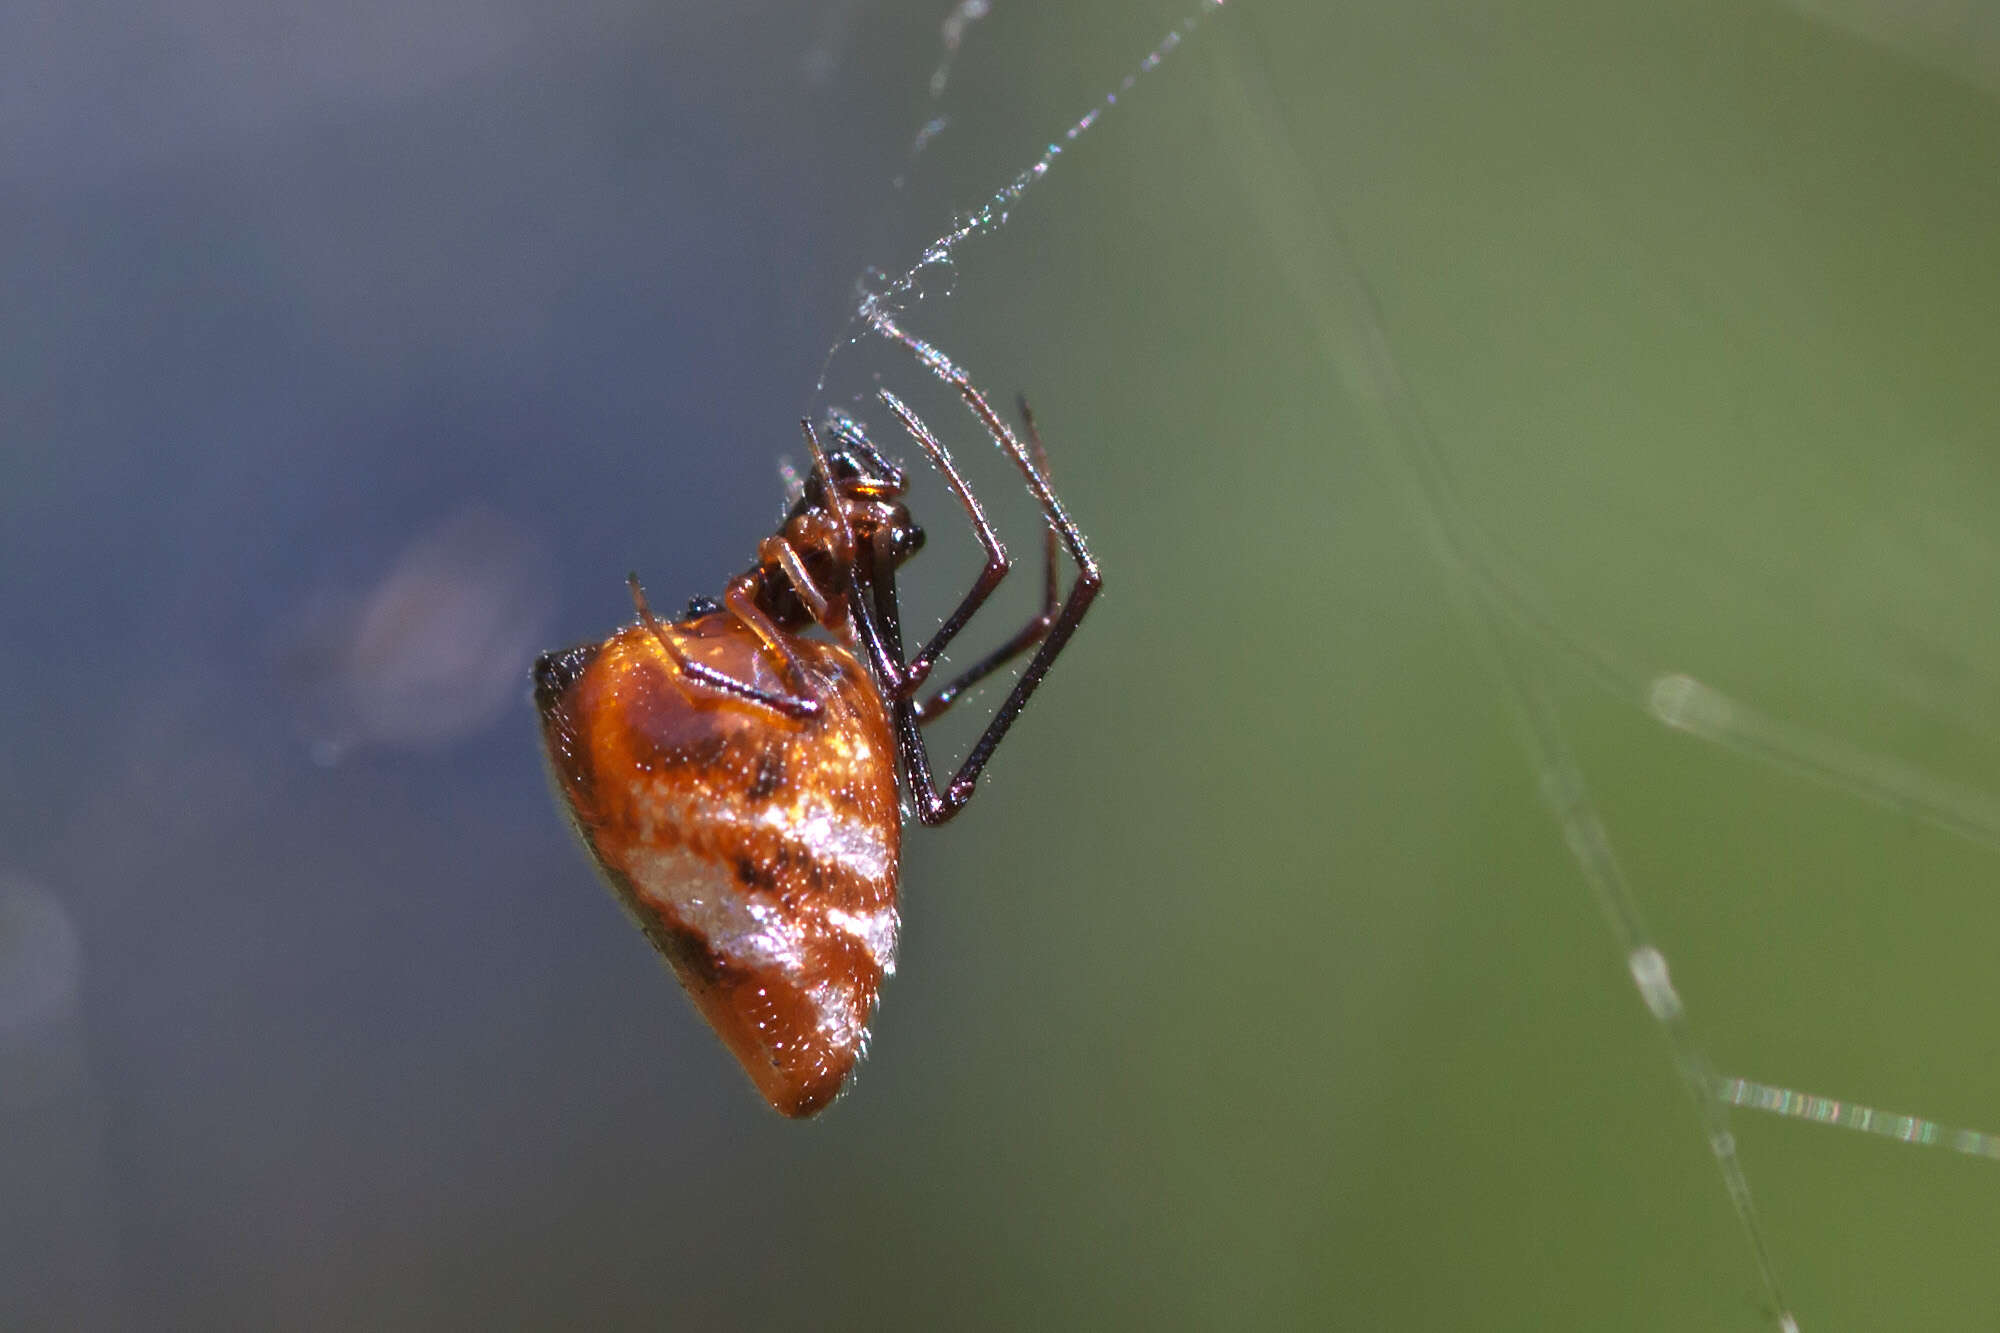 Image of tangle web spiders